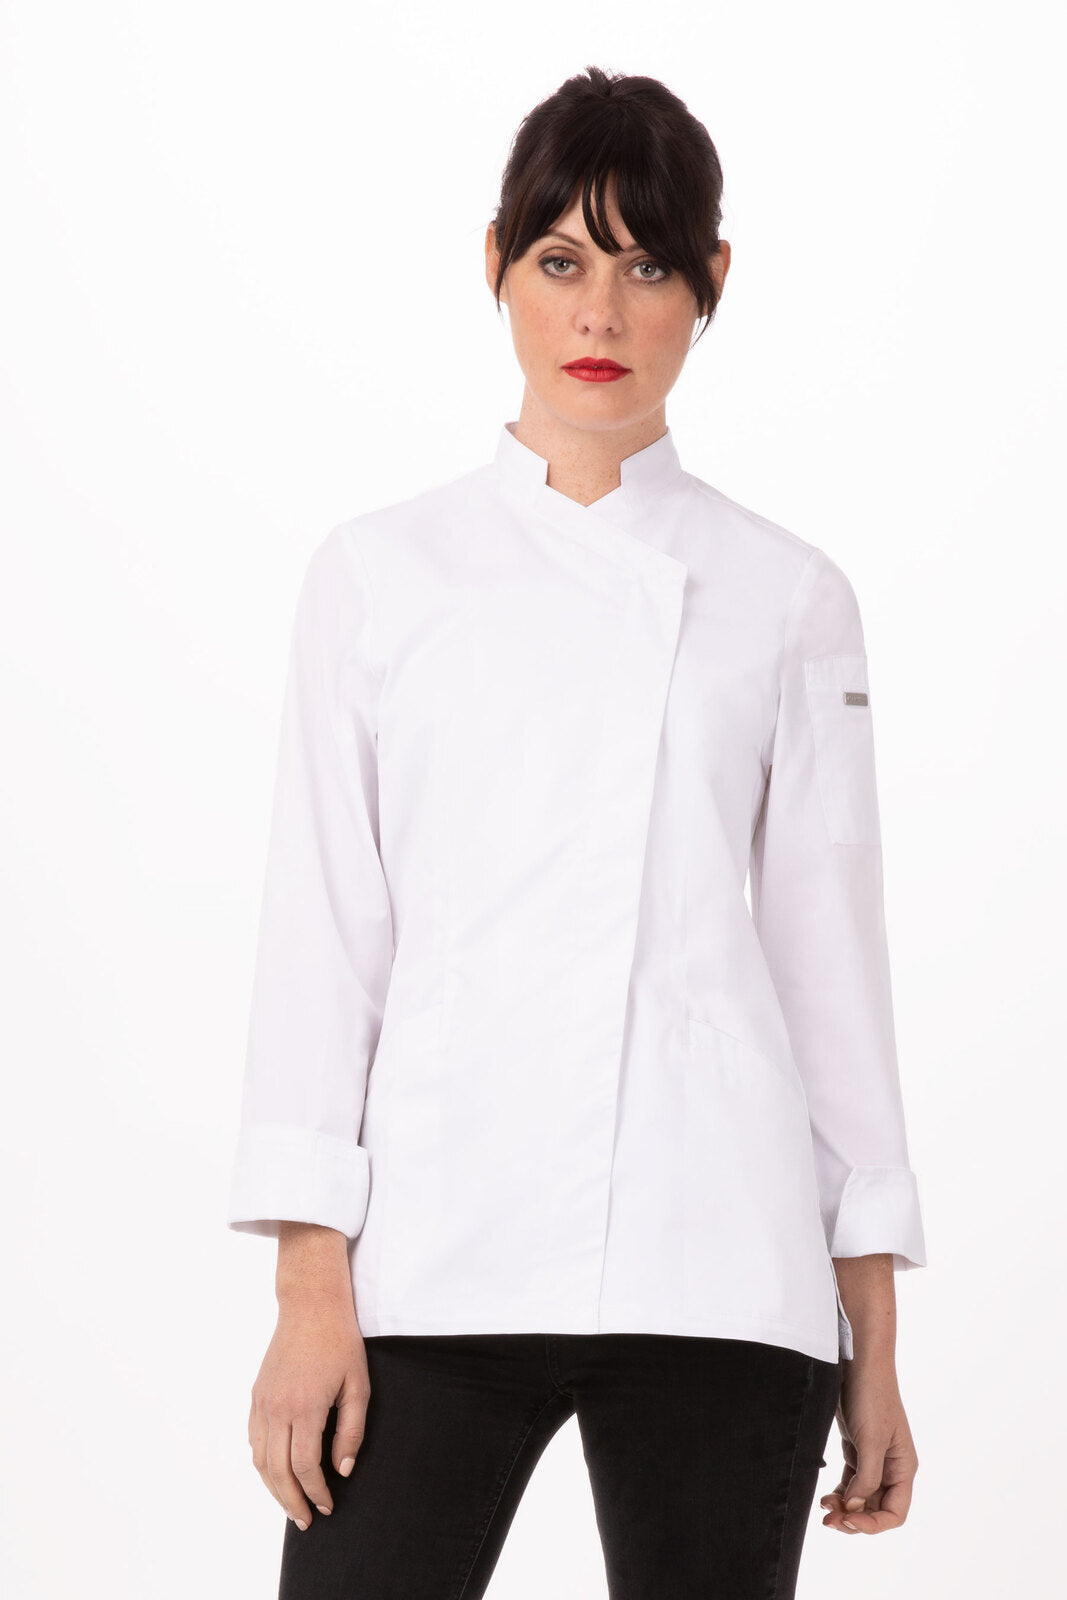 Chef Works Marrakesh V Series Chef Jacket (CES03W)